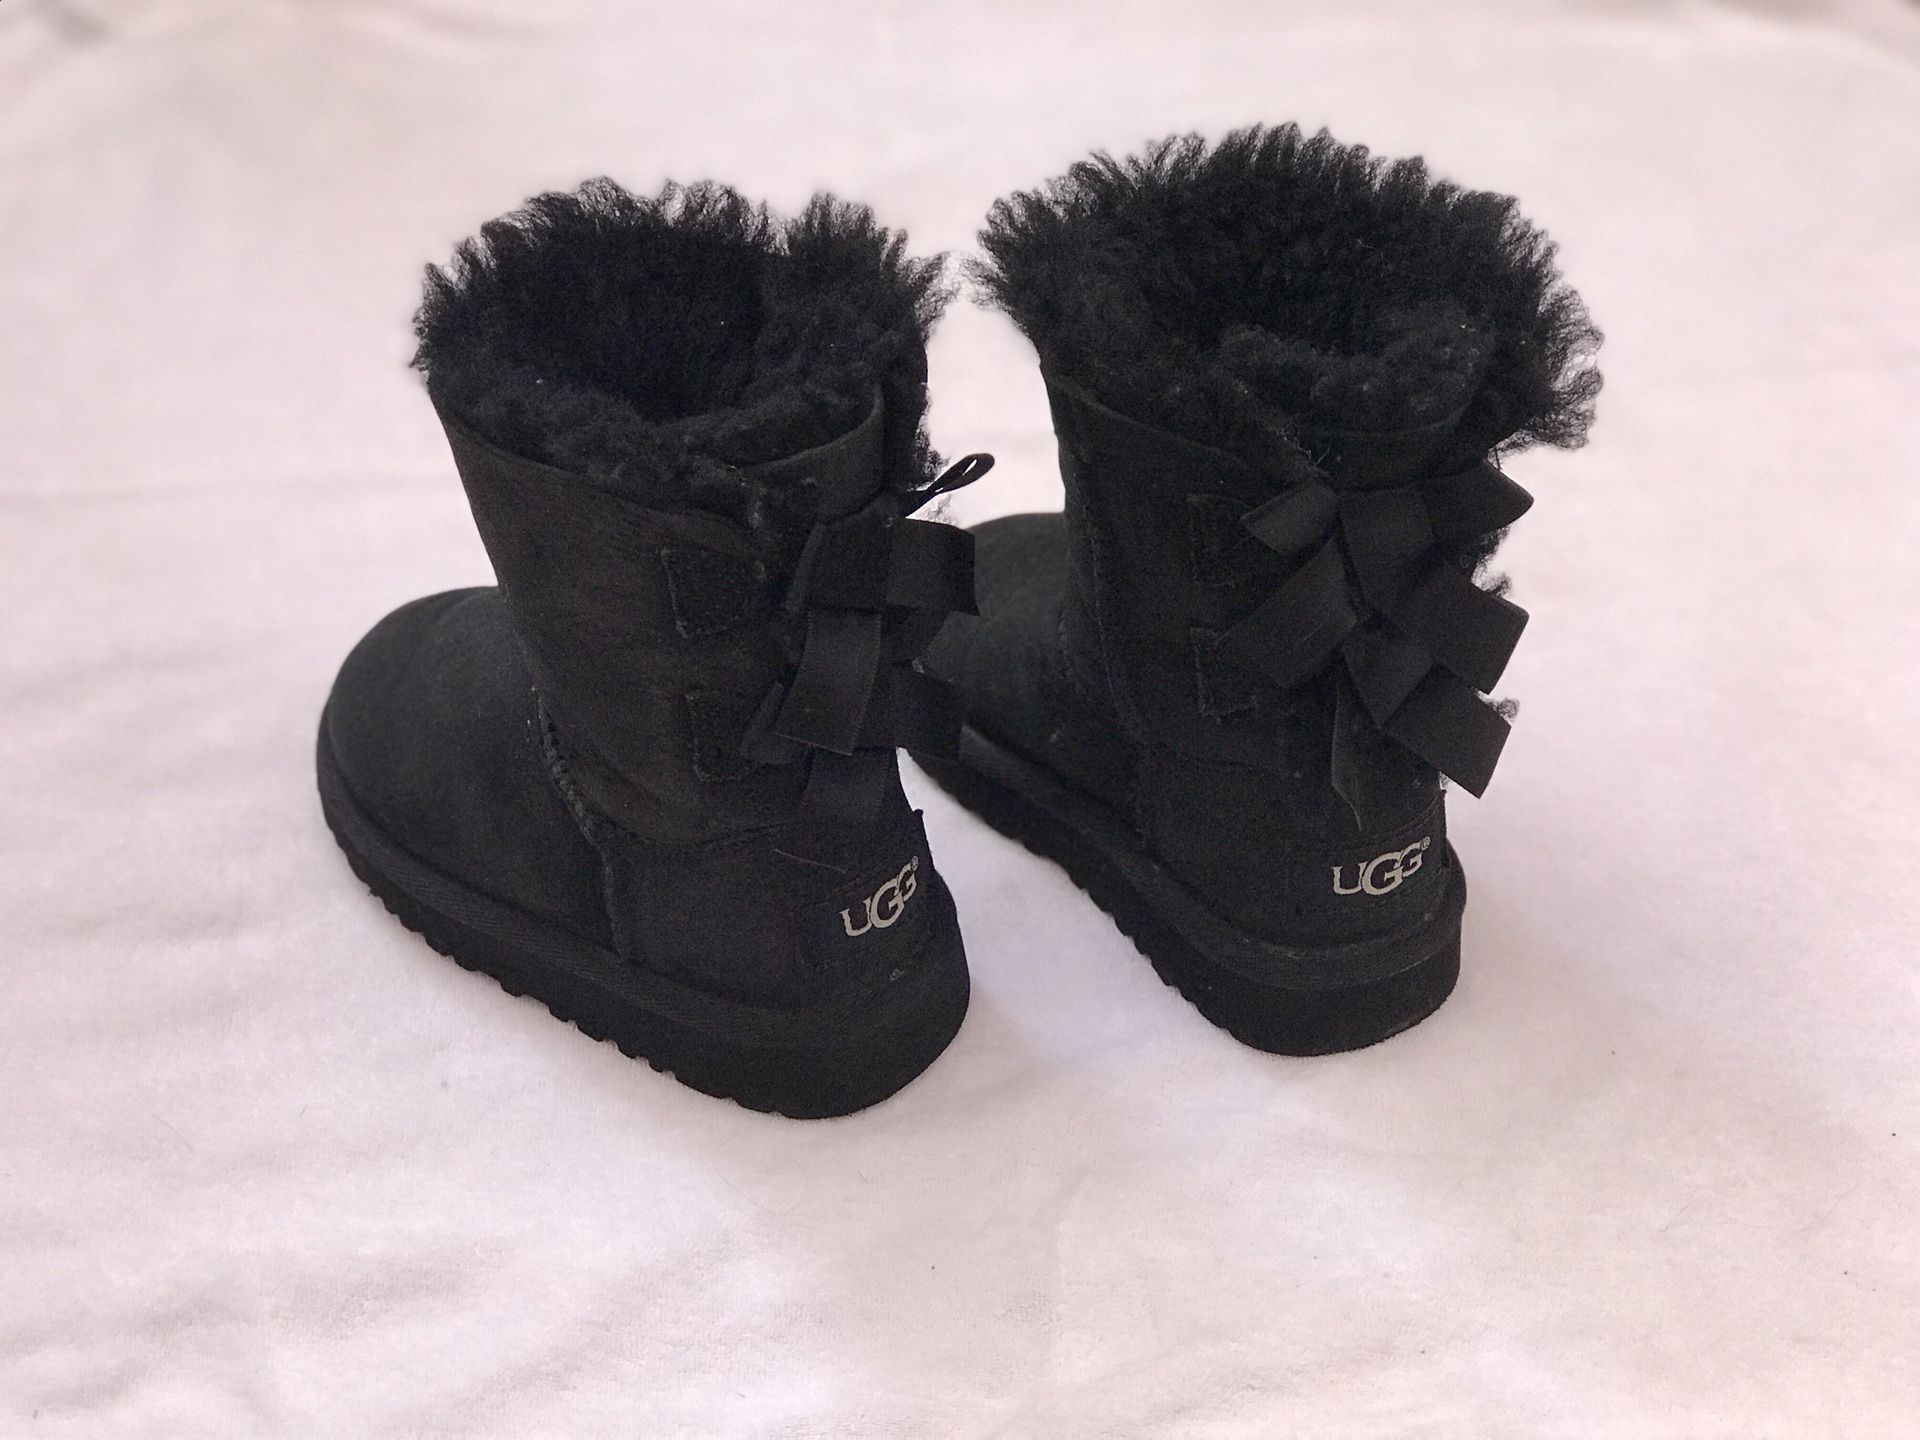 Toddler boots UGG size 7c